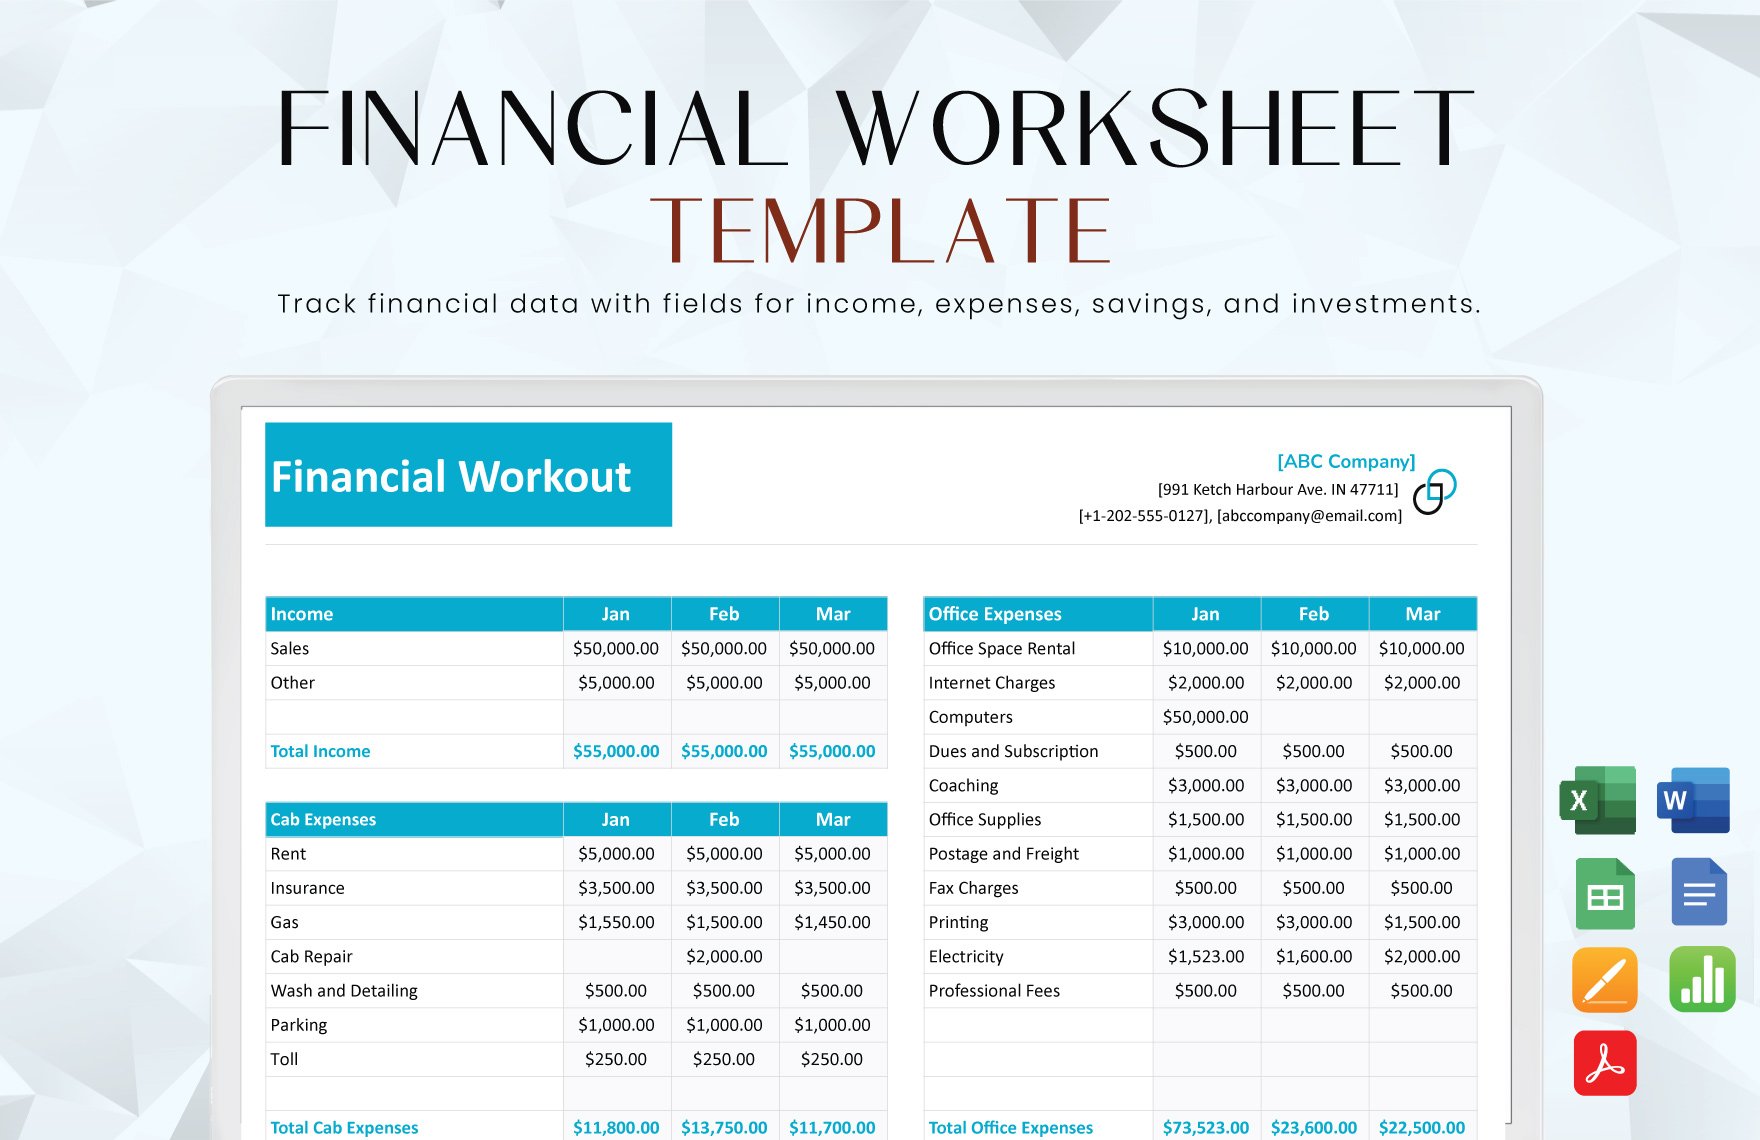 Financial Worksheet Template in Word, Google Docs, Excel, PDF, Google Sheets, Apple Pages, Apple Numbers